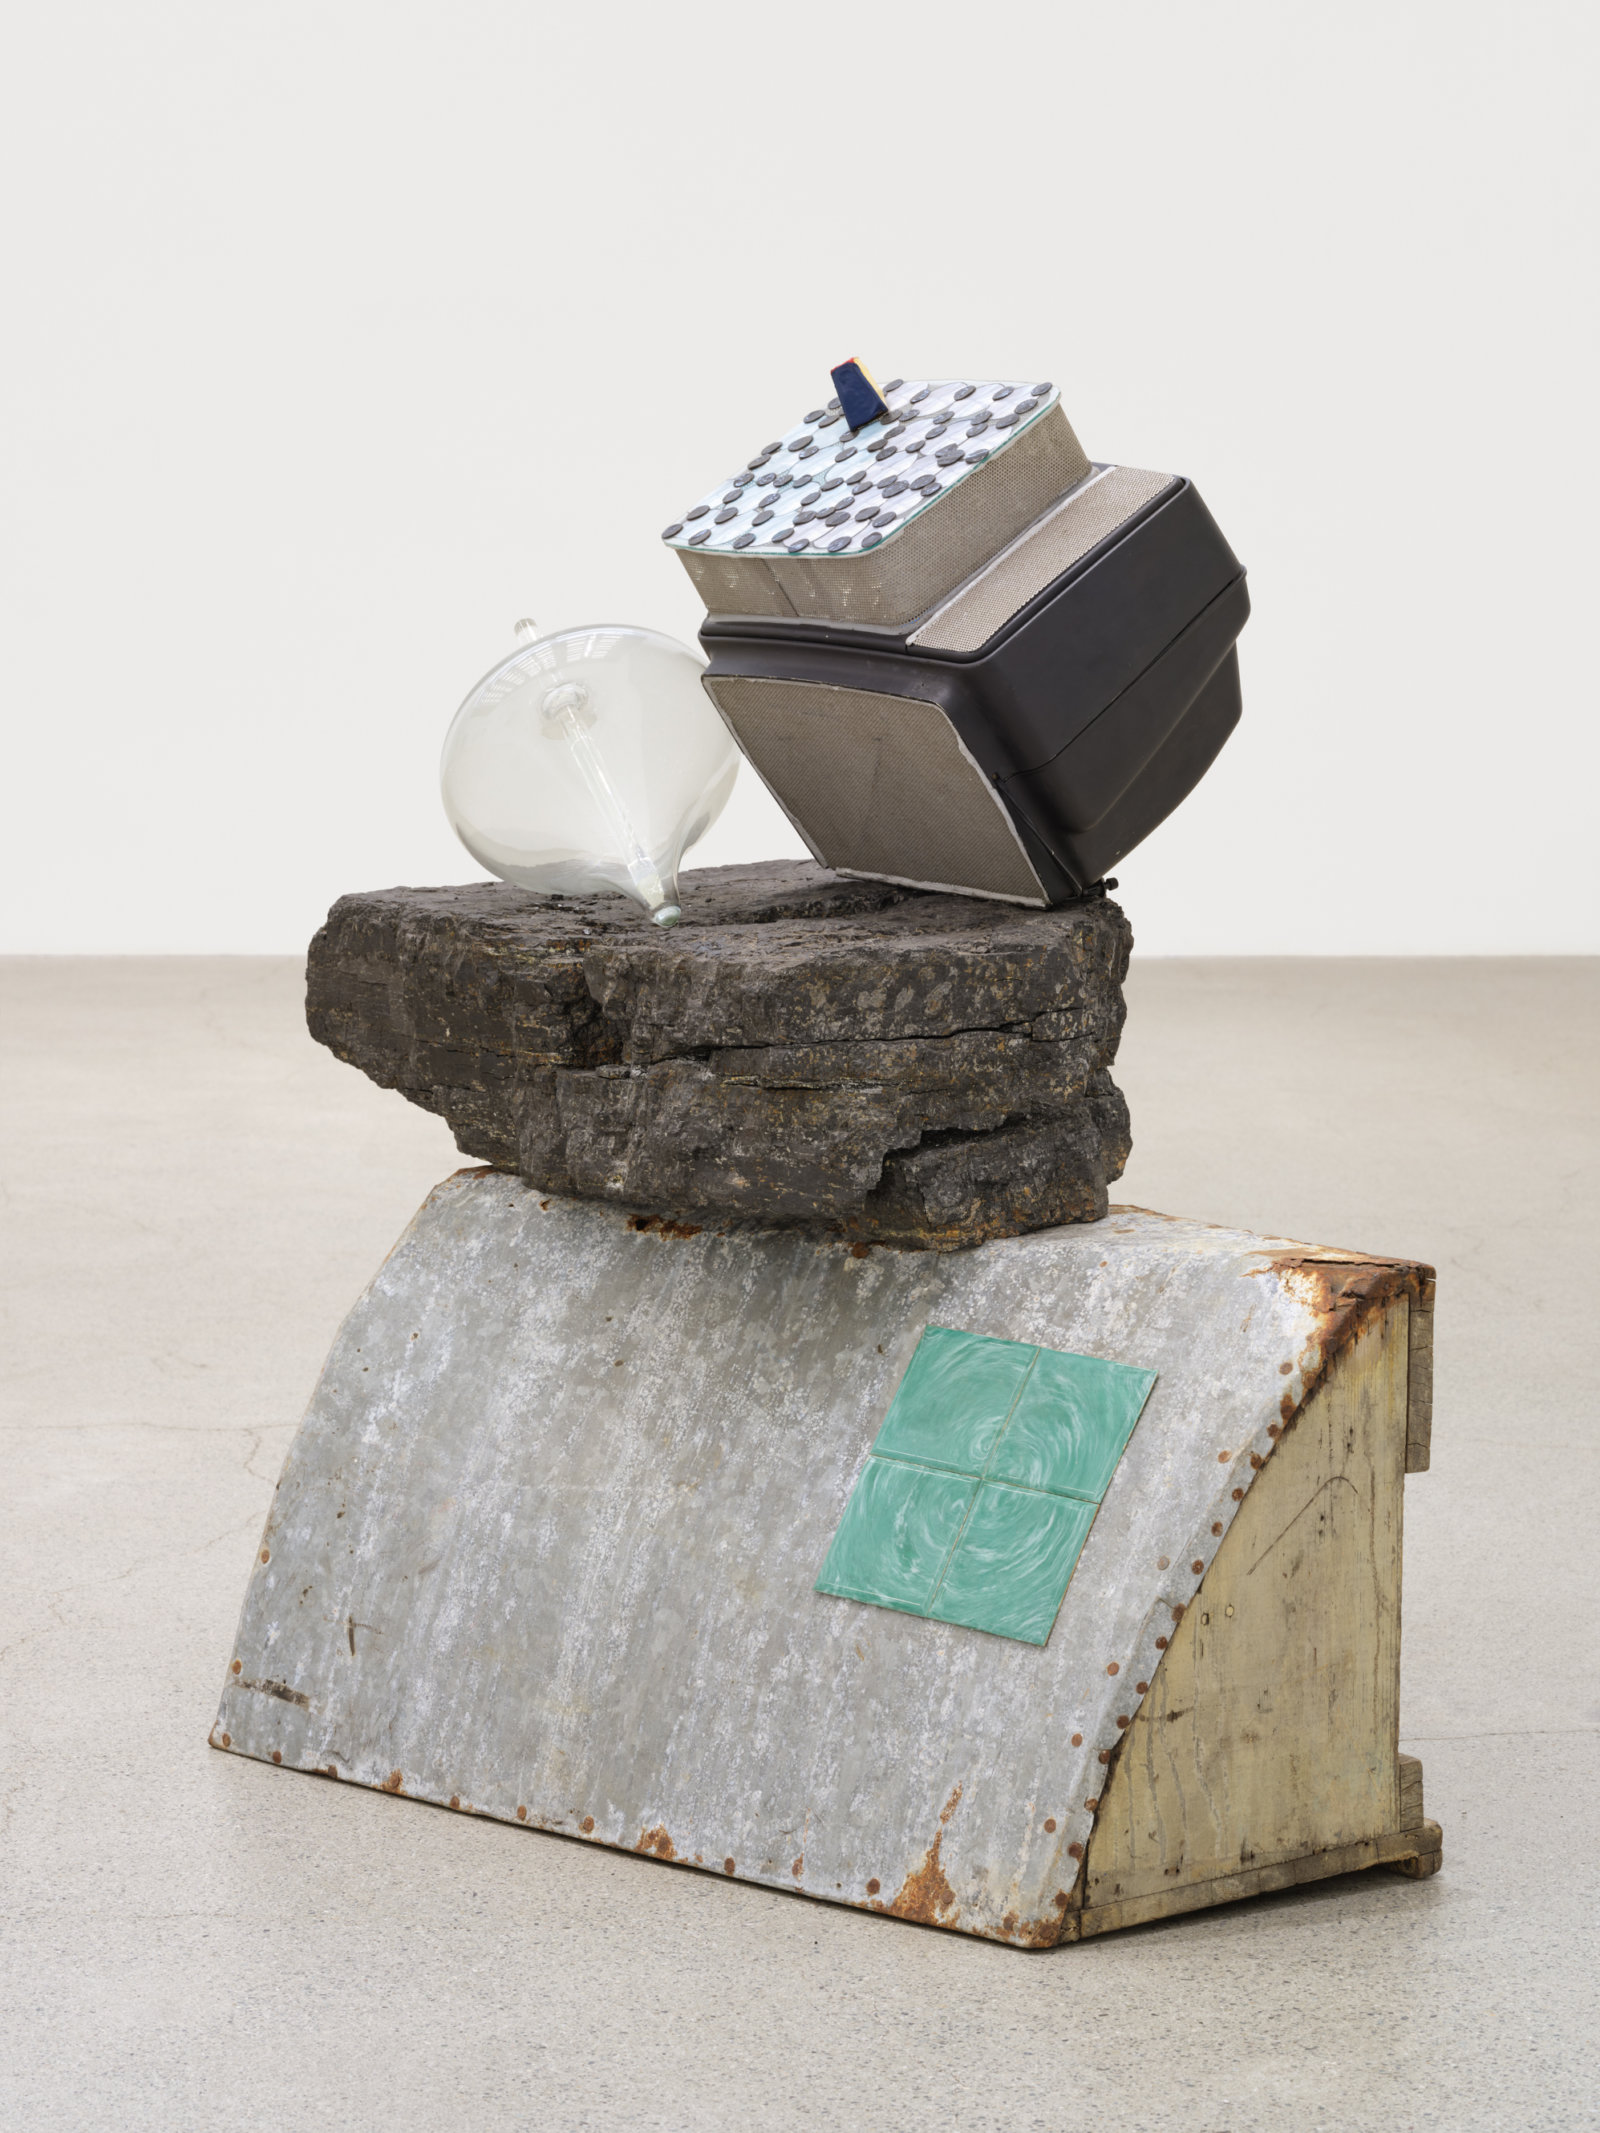 Jerry Pethick, Floating Free, 1972–1993, wood, galvanized metal, plastic, coal, TV, duratrans, blown glass, lenses, aluminum, tiles, silicone, 43 x 27 x 42 in. (109 x 67 x 105 cm)